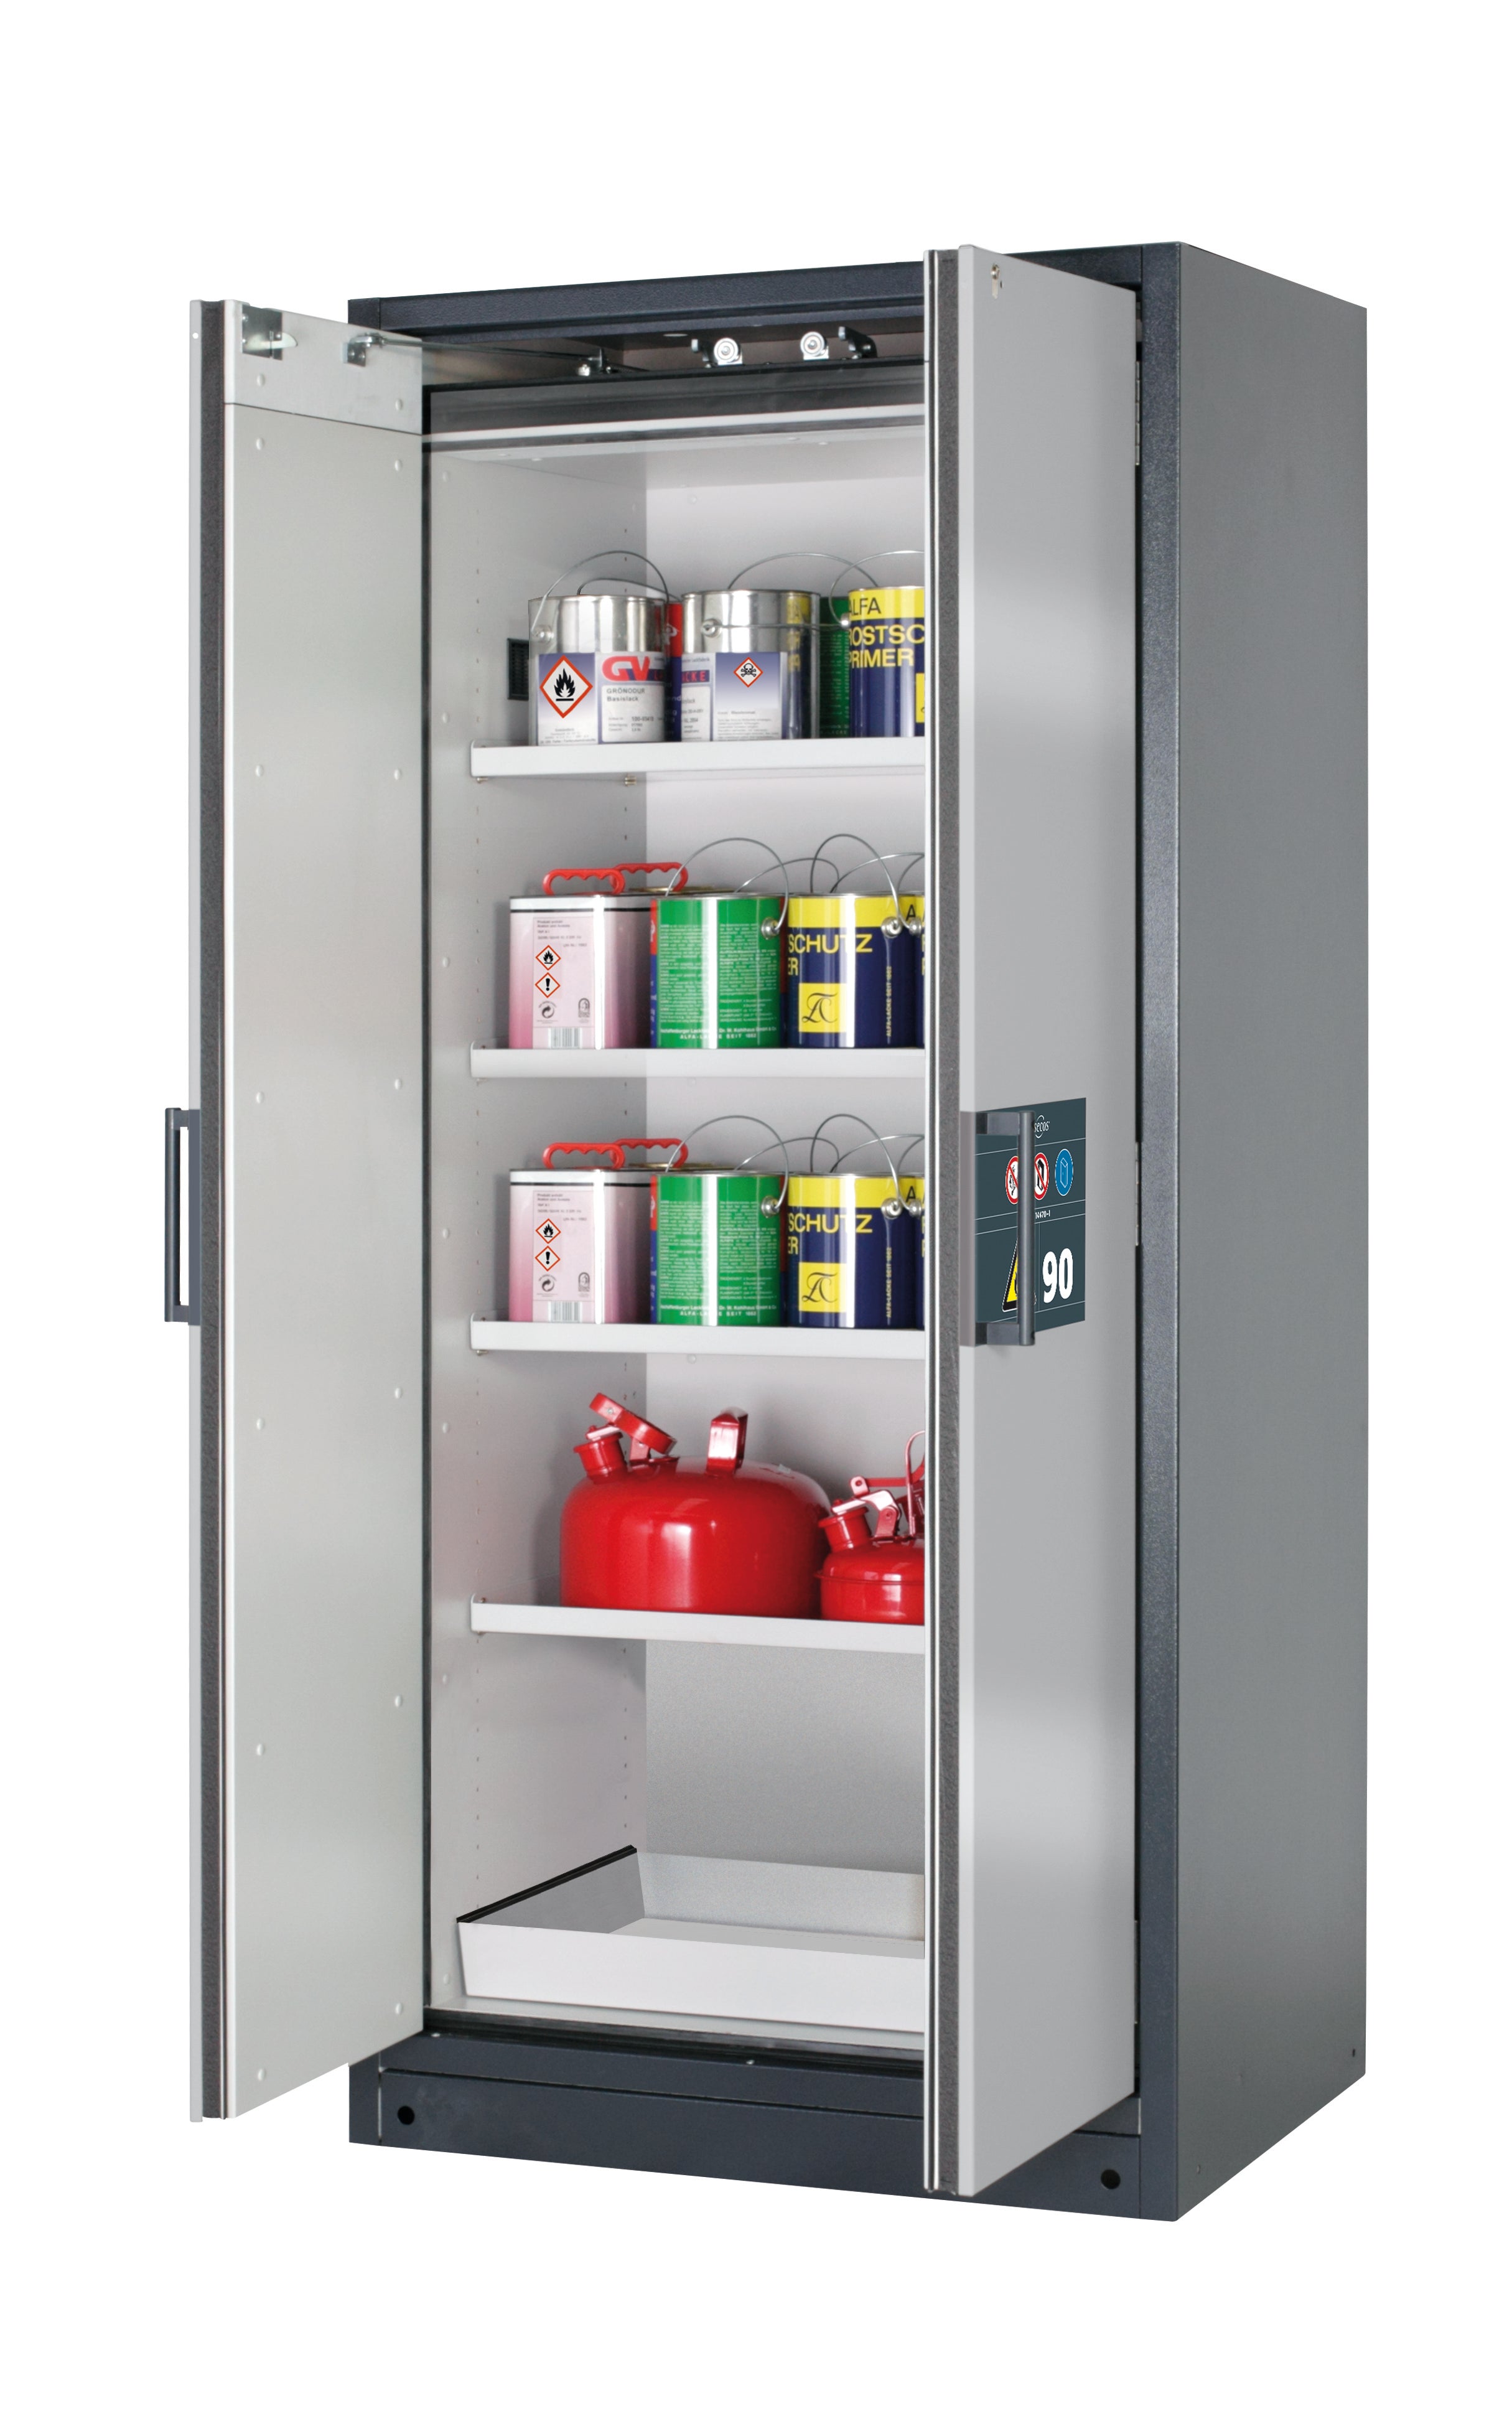 Type 90 safety storage cabinet Q-CLASSIC-90 model Q90.195.090 in asecos silver with 4x shelf standard (sheet steel),